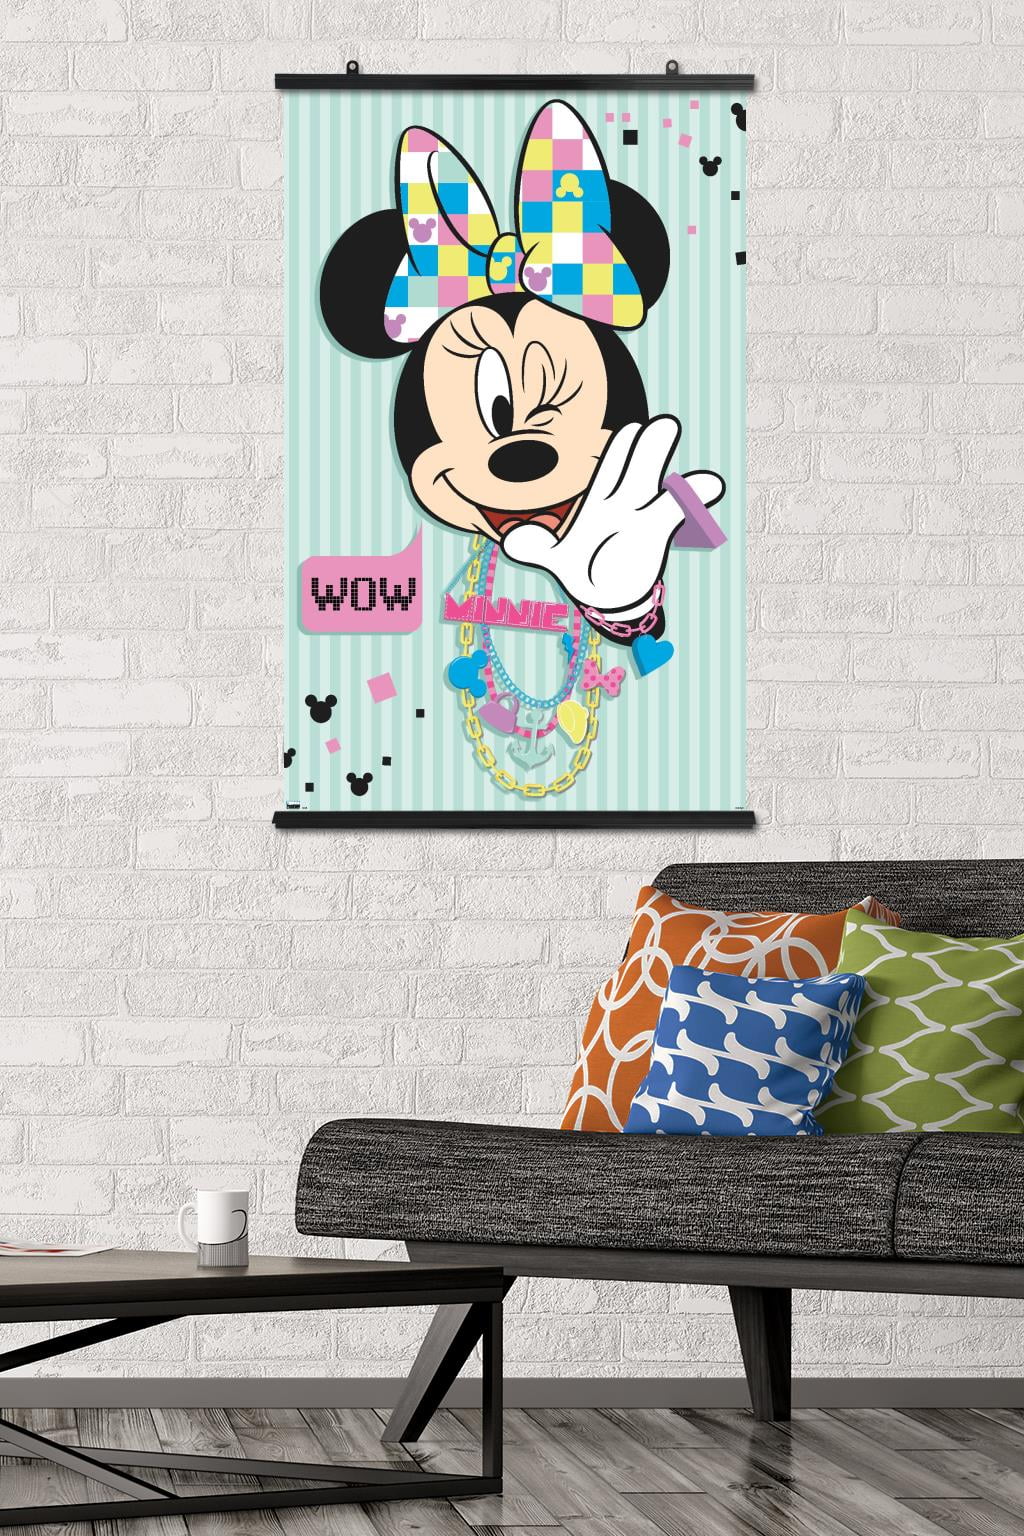 Disney Minnie Mouse - Wow Wall Poster, 22.375